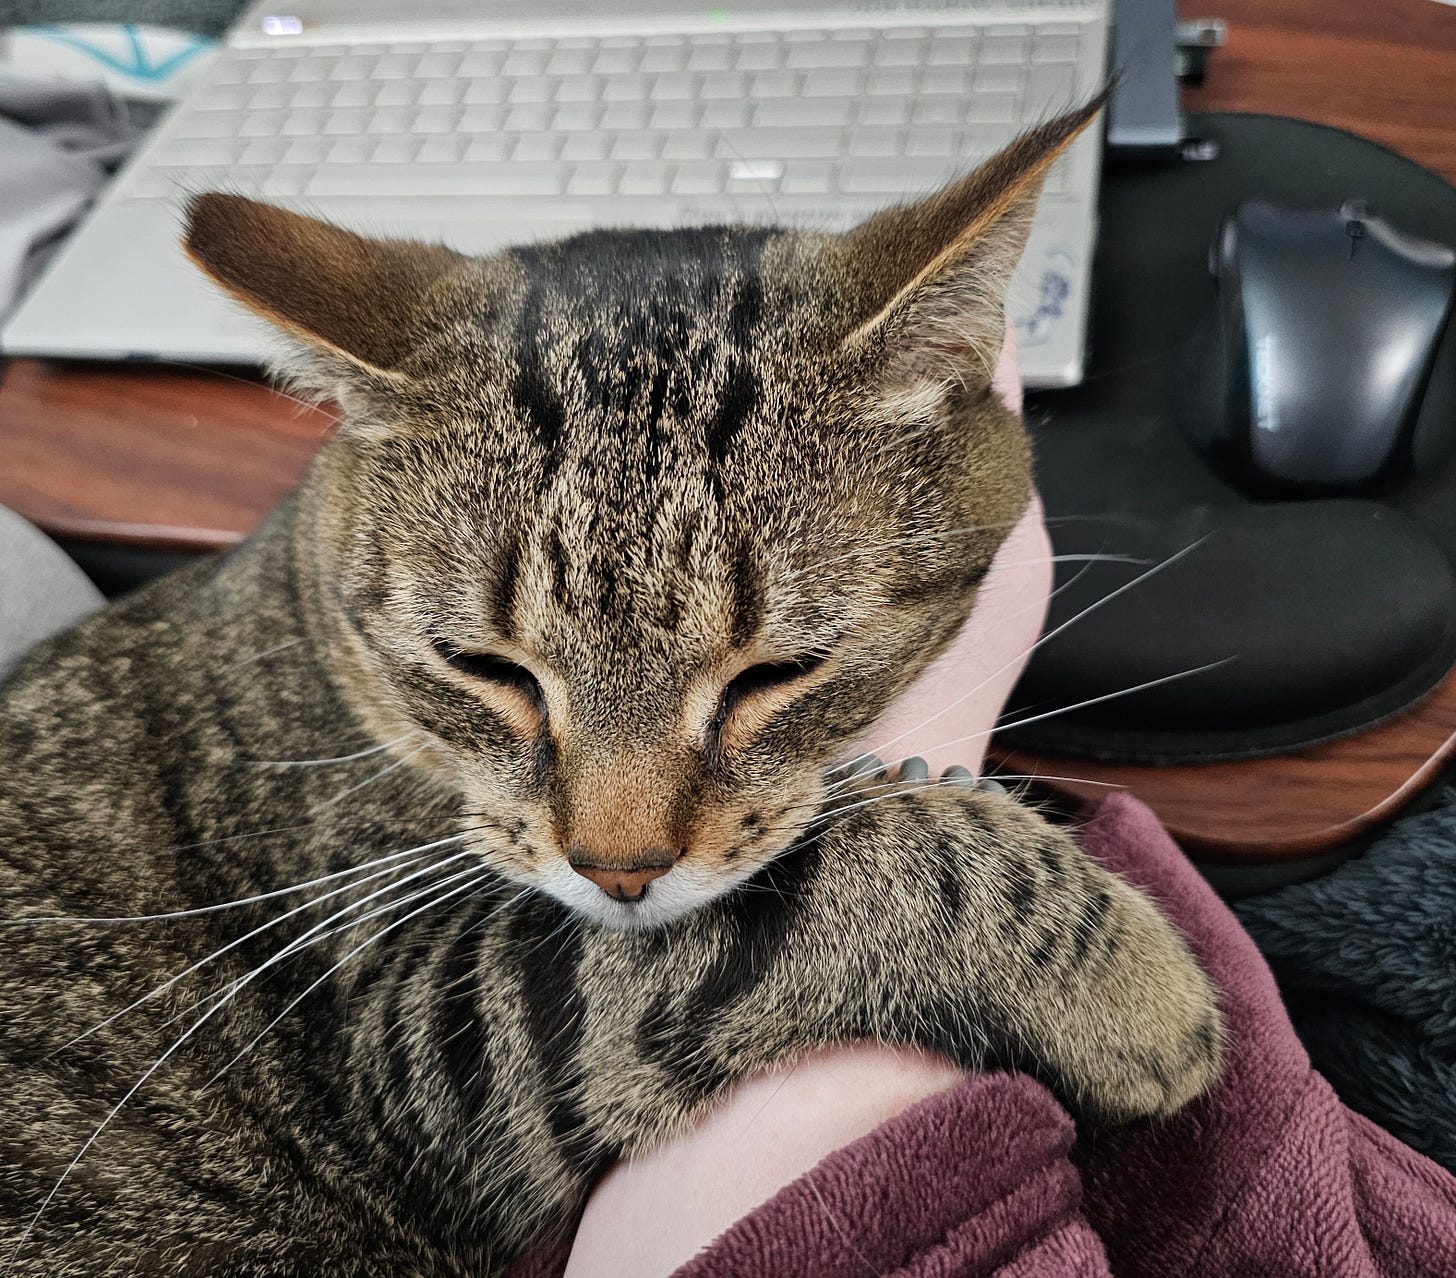 My tabby cat Simon clinging to my hand and wrist while I try to work on my computer.